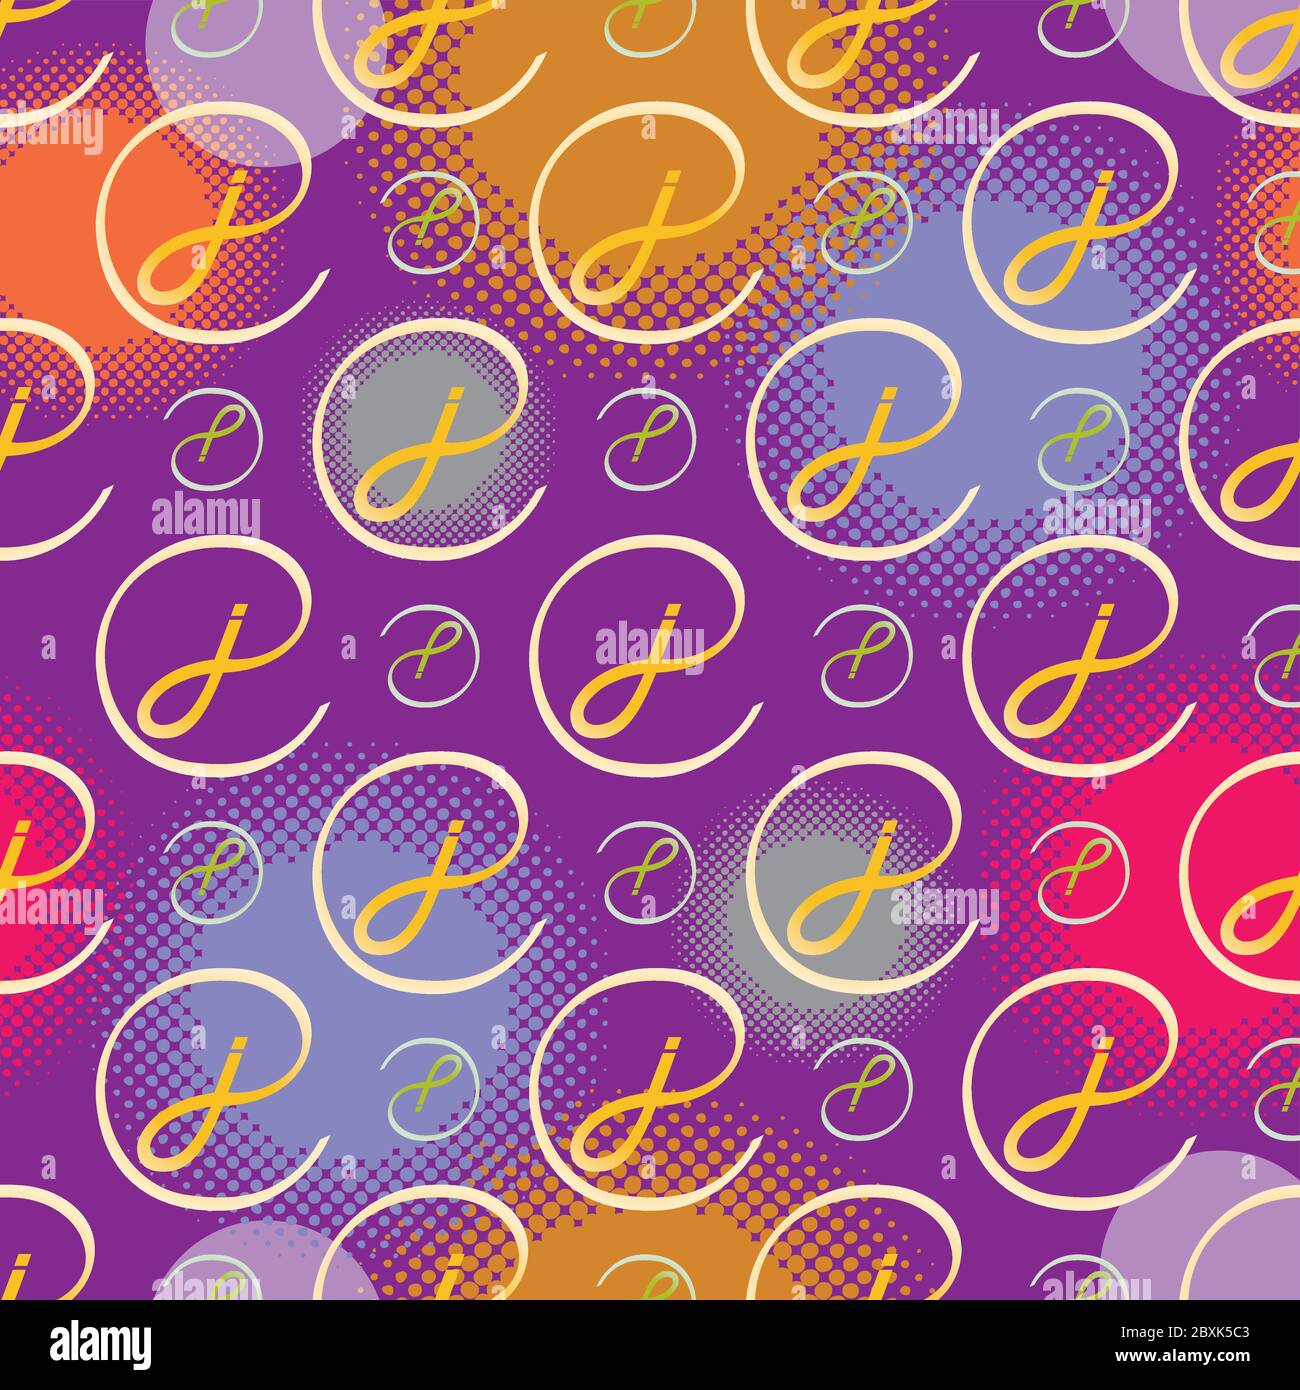 Monogram Seamless Pattern of Letter J - Purple and Gold Colors Stock Vector